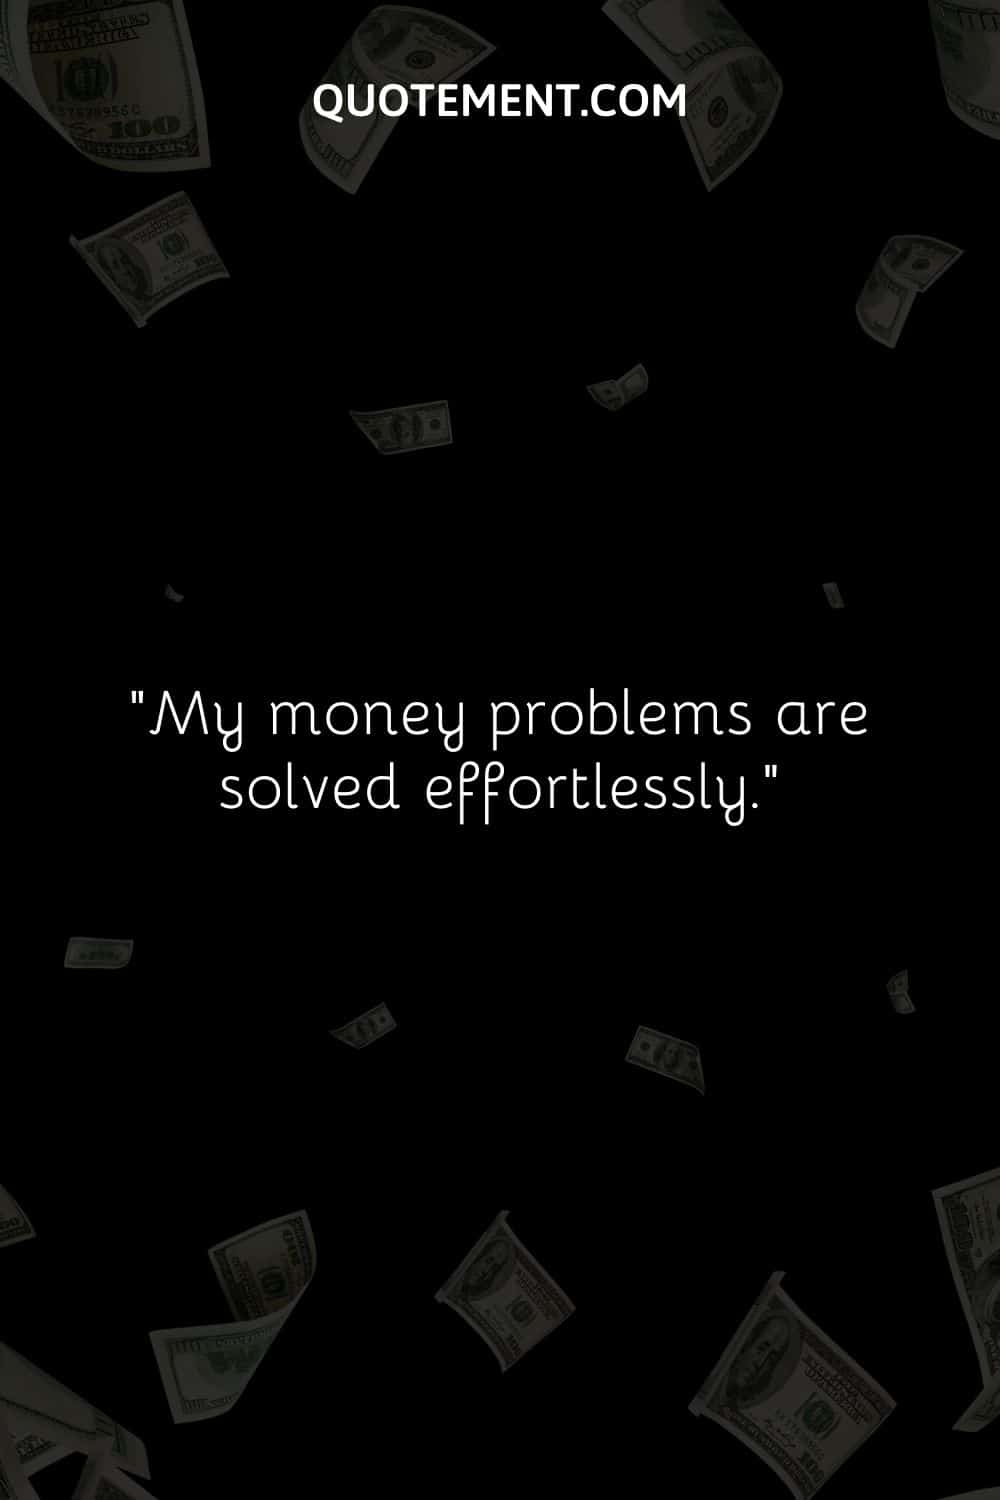 money in the air image representing money positive affirmation